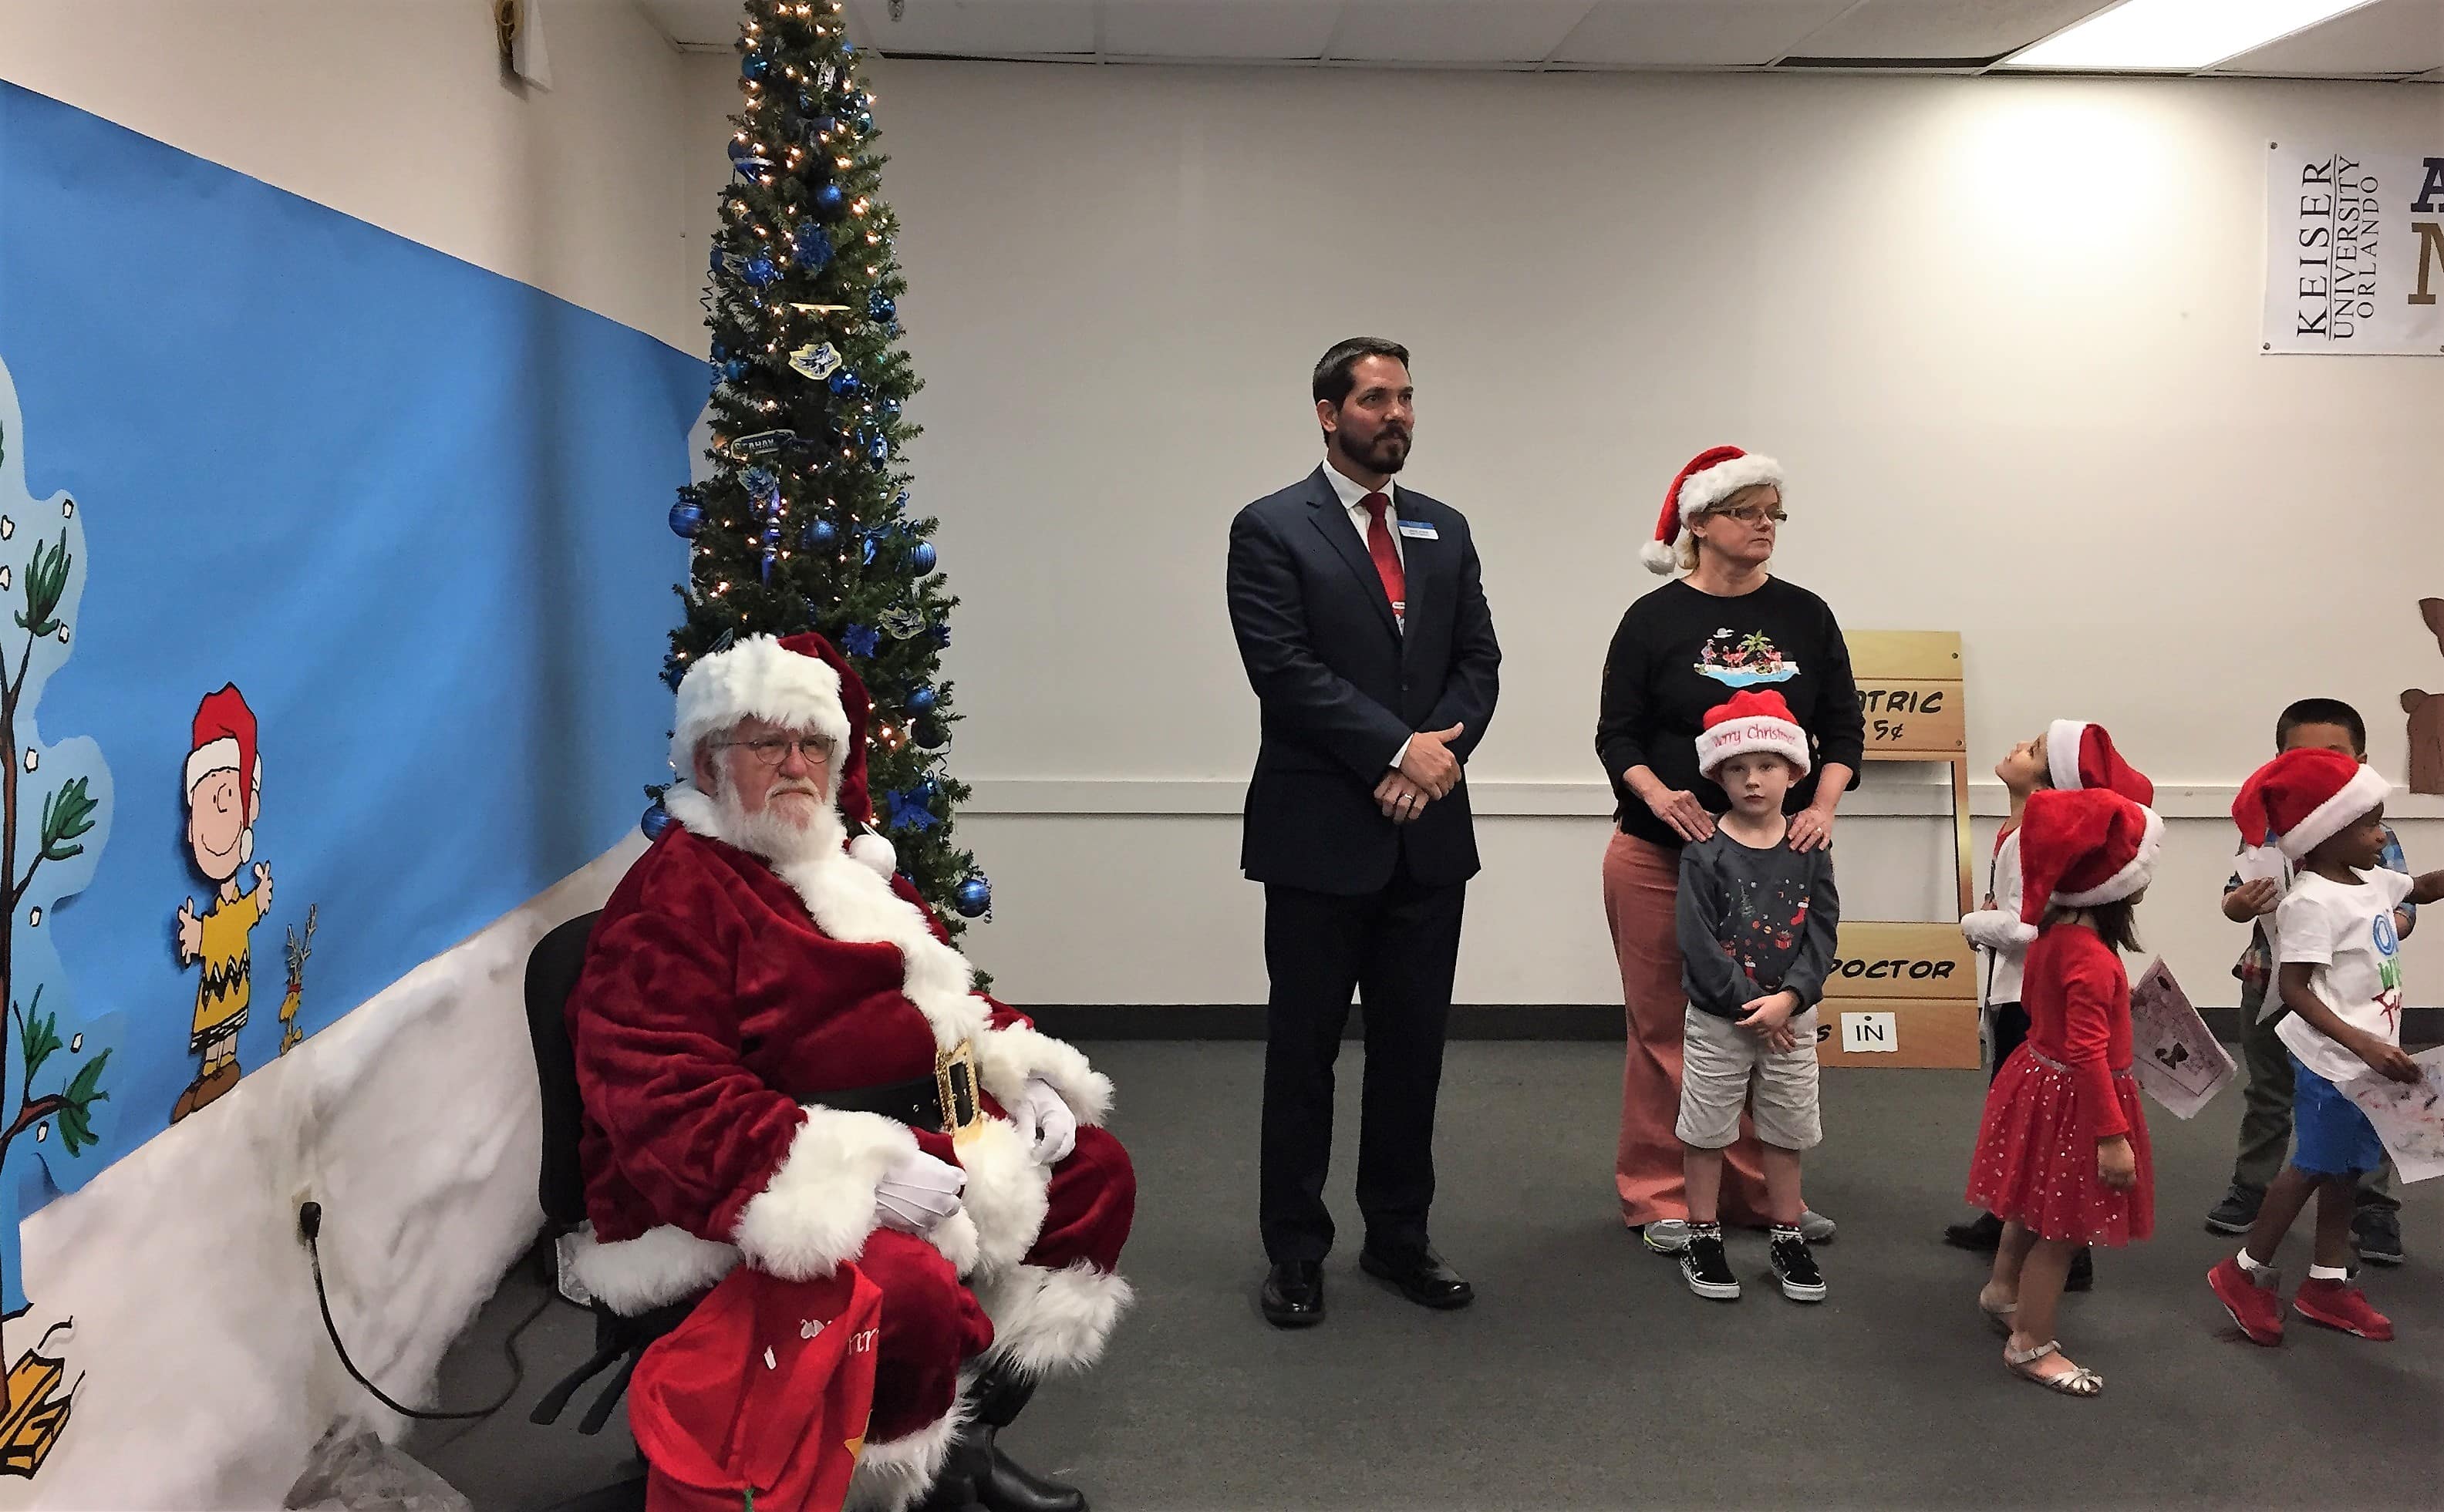 Orlando Gets Festive with Their Annual “Keiser for the Holidays” Event